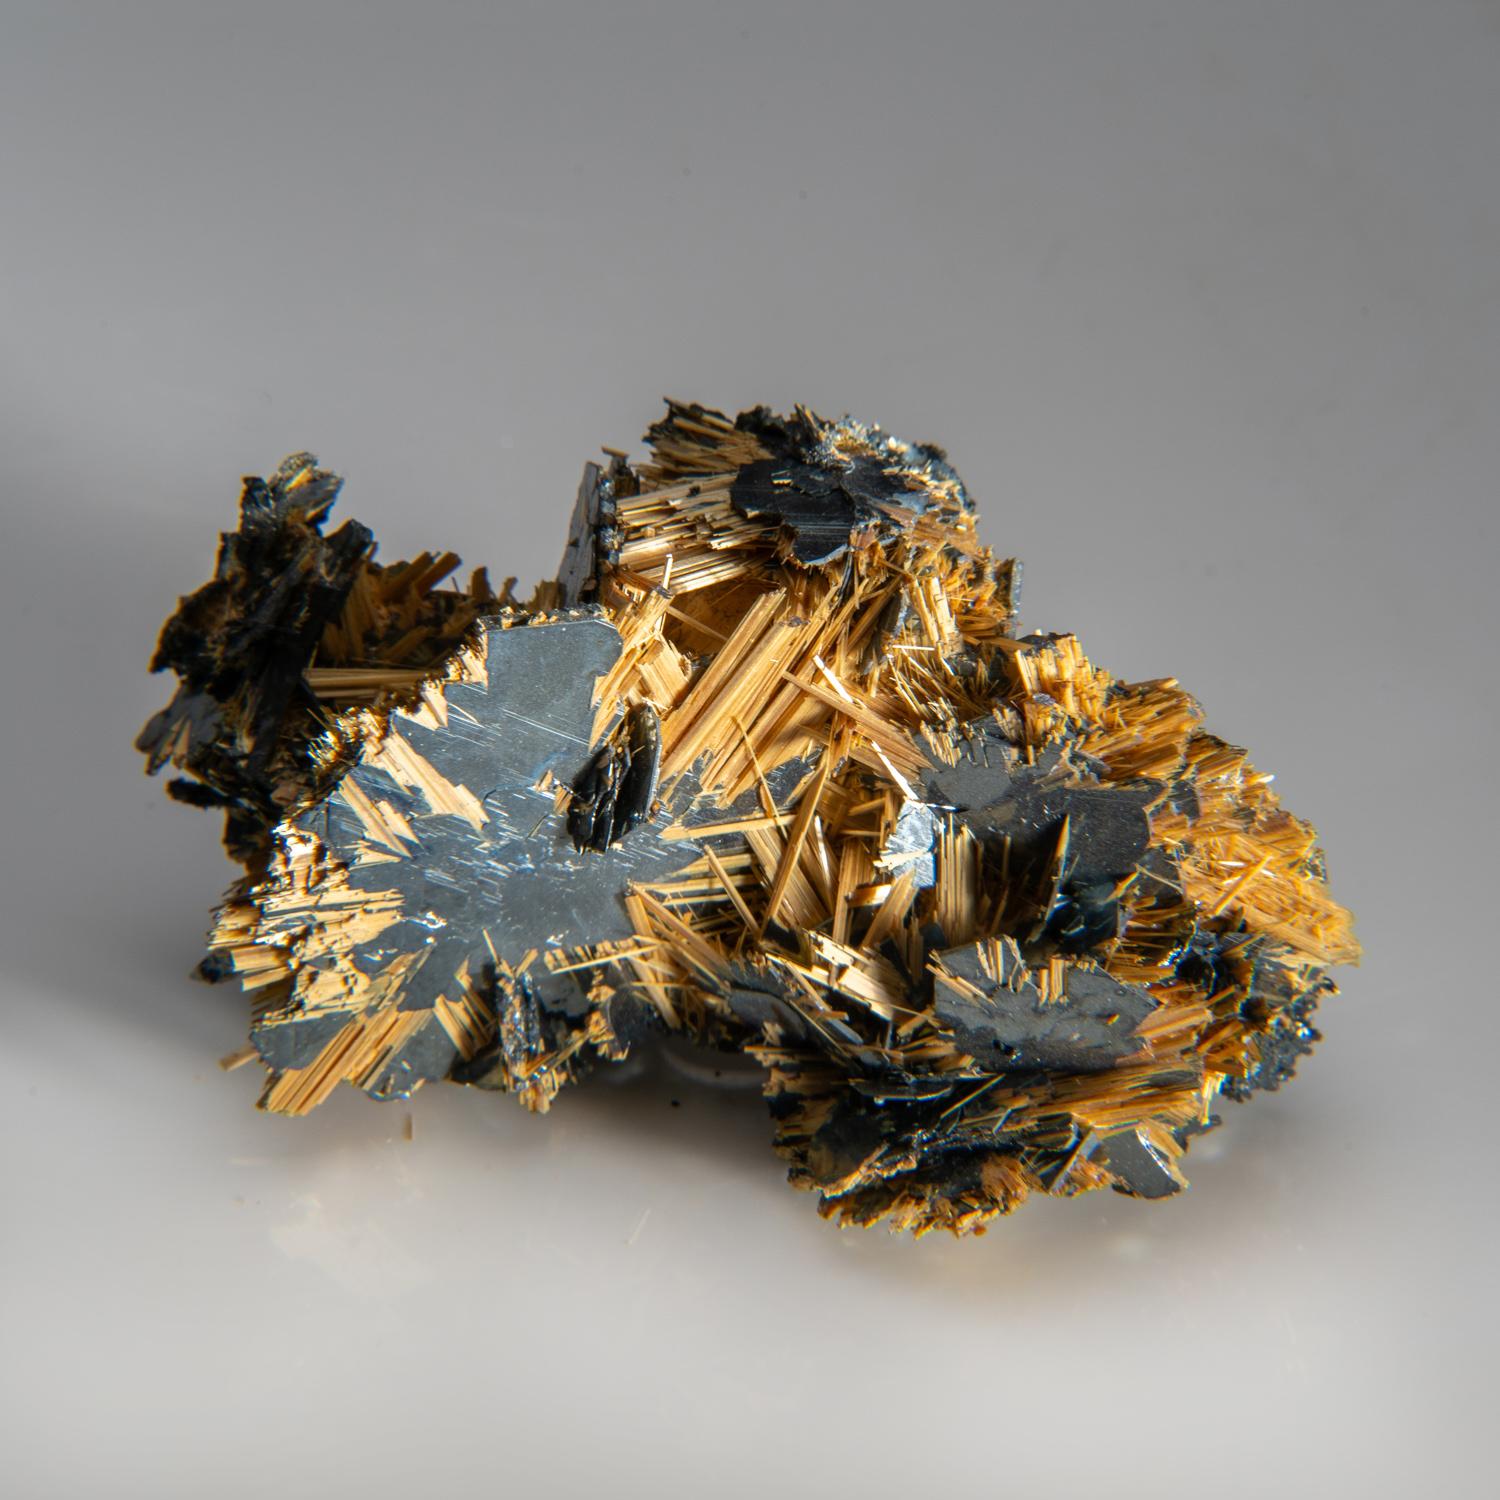 From Novo Horizonte, Bahia, Brazil

Complex cluster of platy black-metallic hematite crystals with golden, needle-like crystals of rutile epitaxially oriented on the hematite. The specimen is fully crystallized front and rear. 


Weight: 140.9